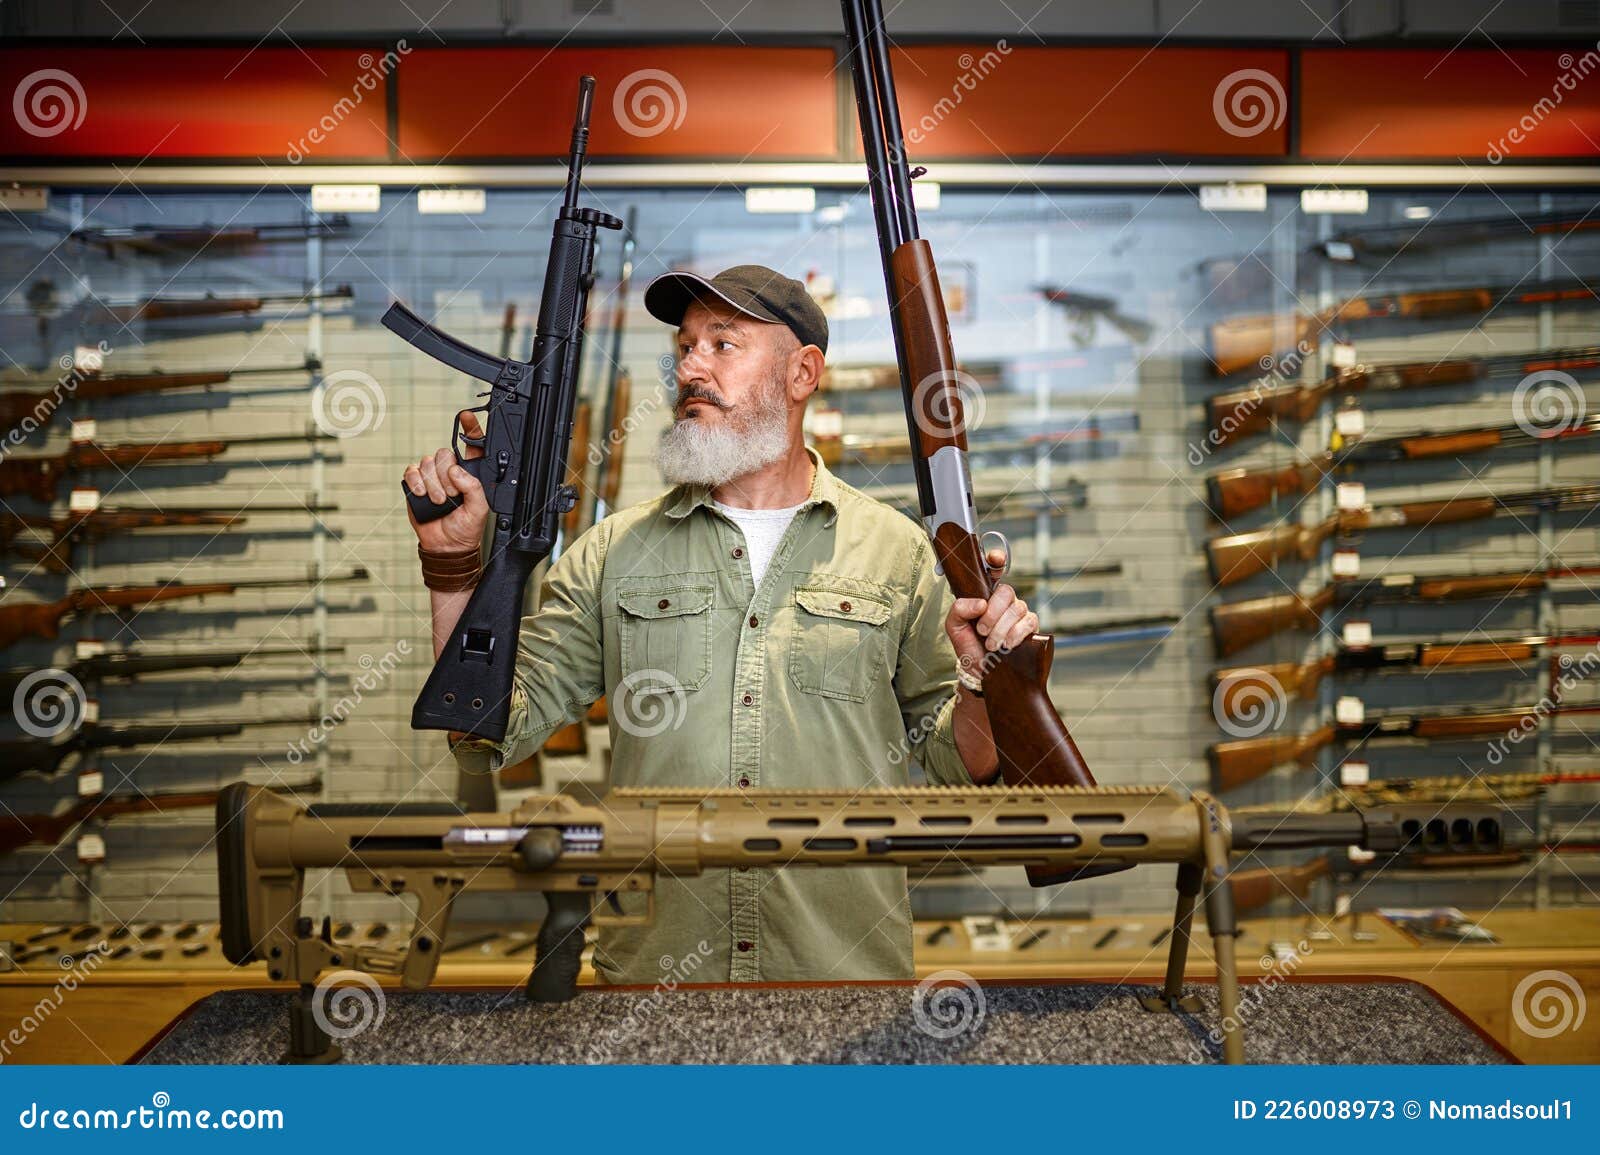 Happy Male Hunter with Two Rifles in Gun Store Stock Image - Image of ...